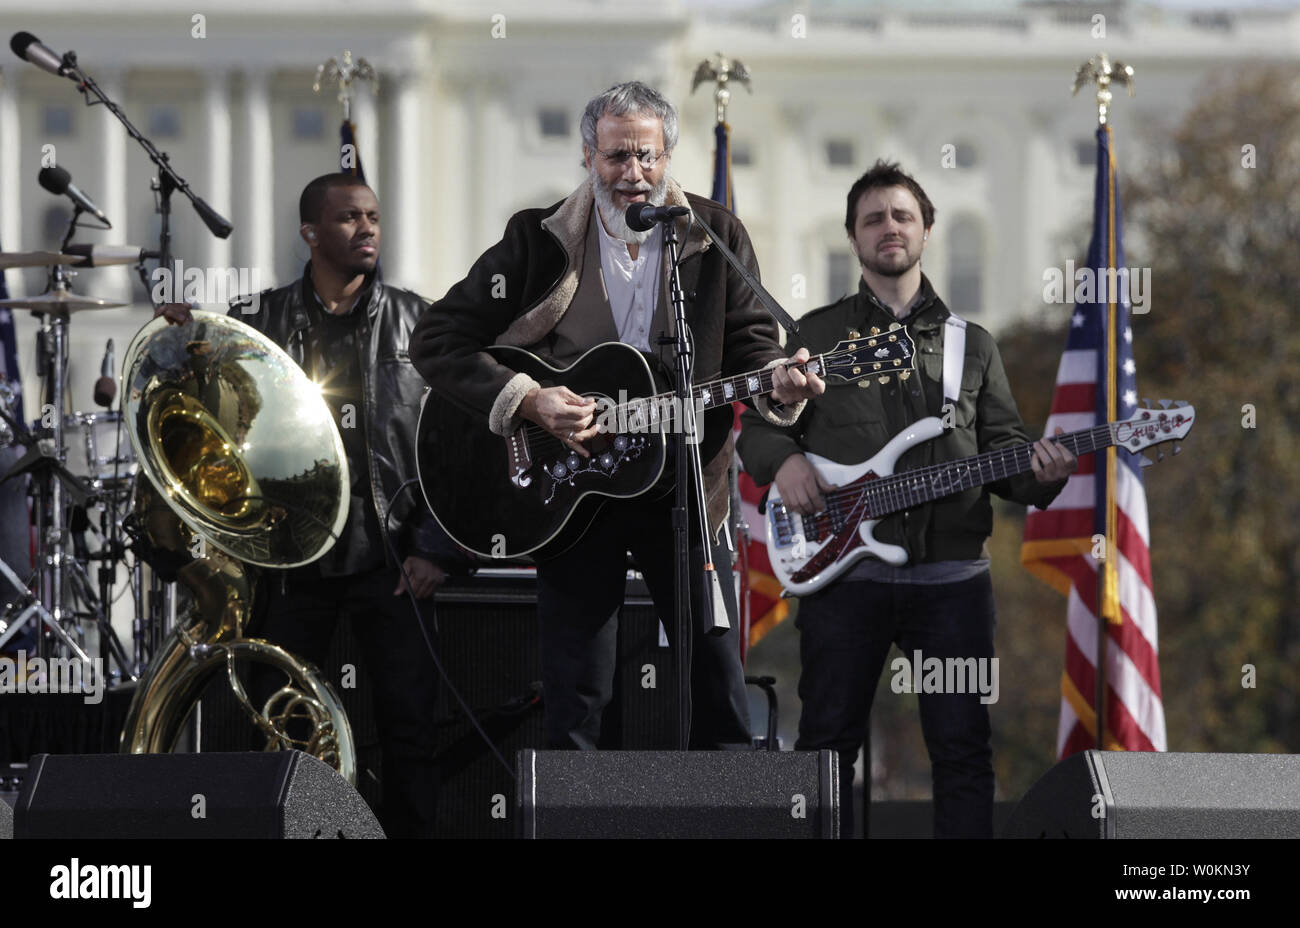 Singer Yusuf Islam performs during the 'Rally to Restore Sanity And/Or Fear' on the National Mall in Washington on October 30, 2010. UPI Photo/Yuri Gripas.. Stock Photo